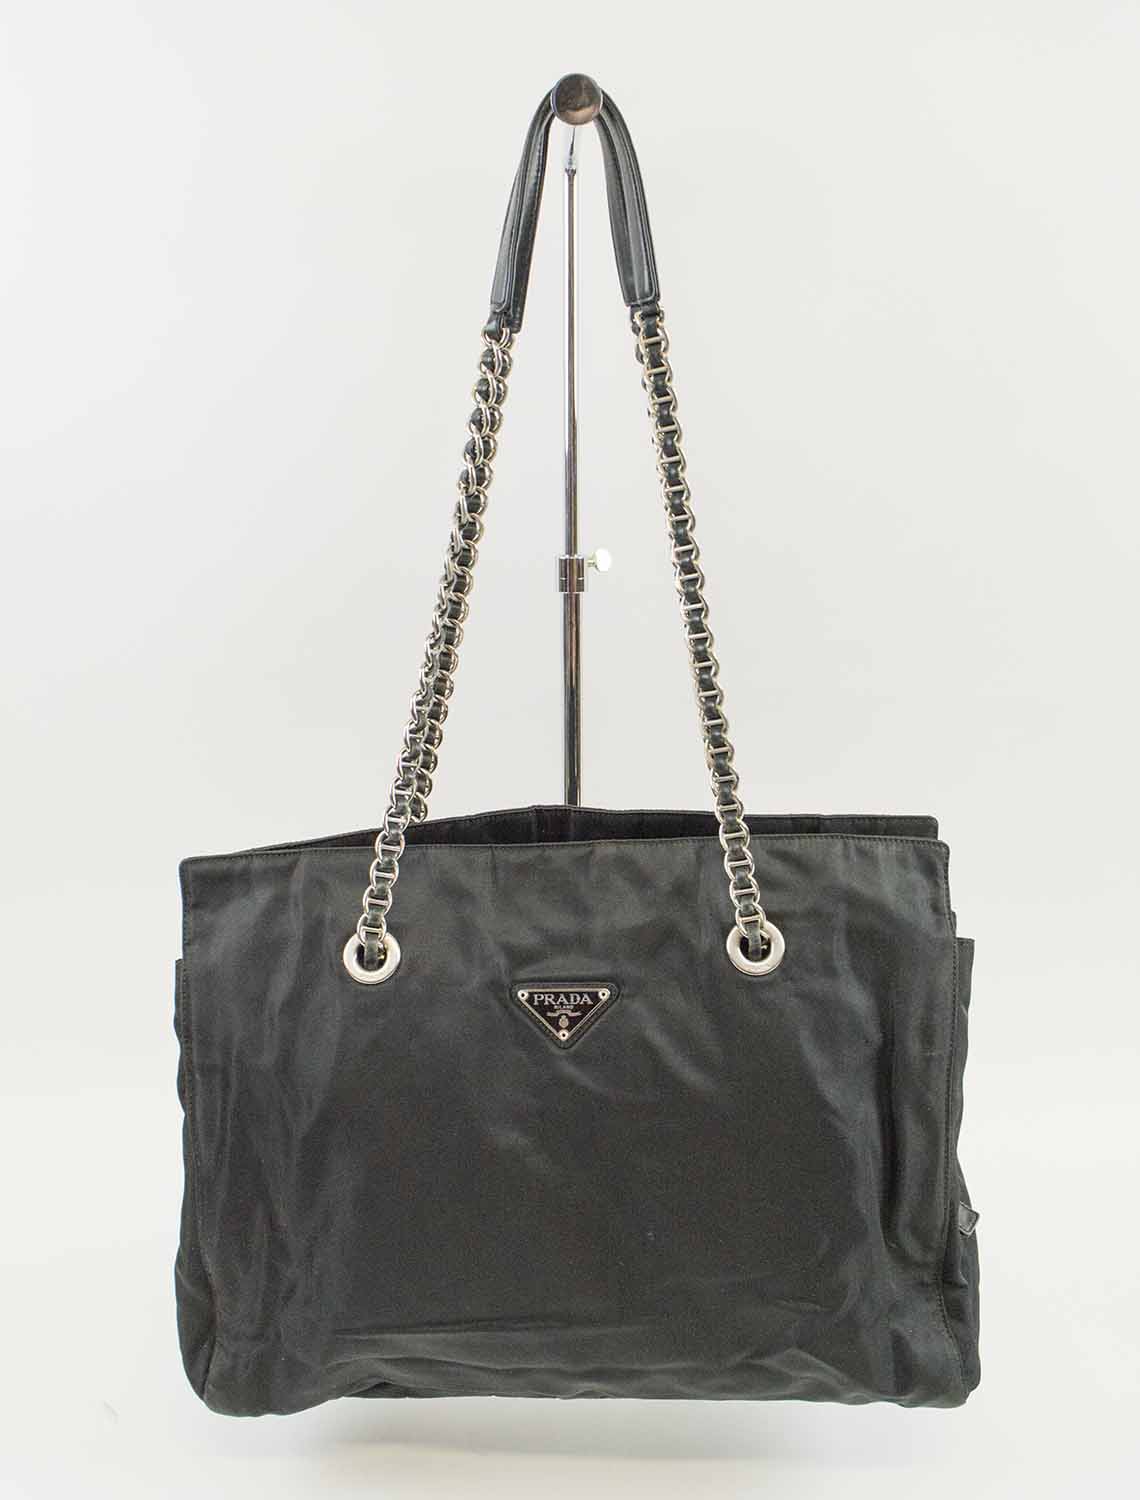 PRADA VINTAGE NYLON TOTE, black nylon with iconic monogram fabric matching  interior, leather and chain shoulder strap, silver tone hardware, three  main compartments, one with zip, 38cm x 13cm x 25cm H.